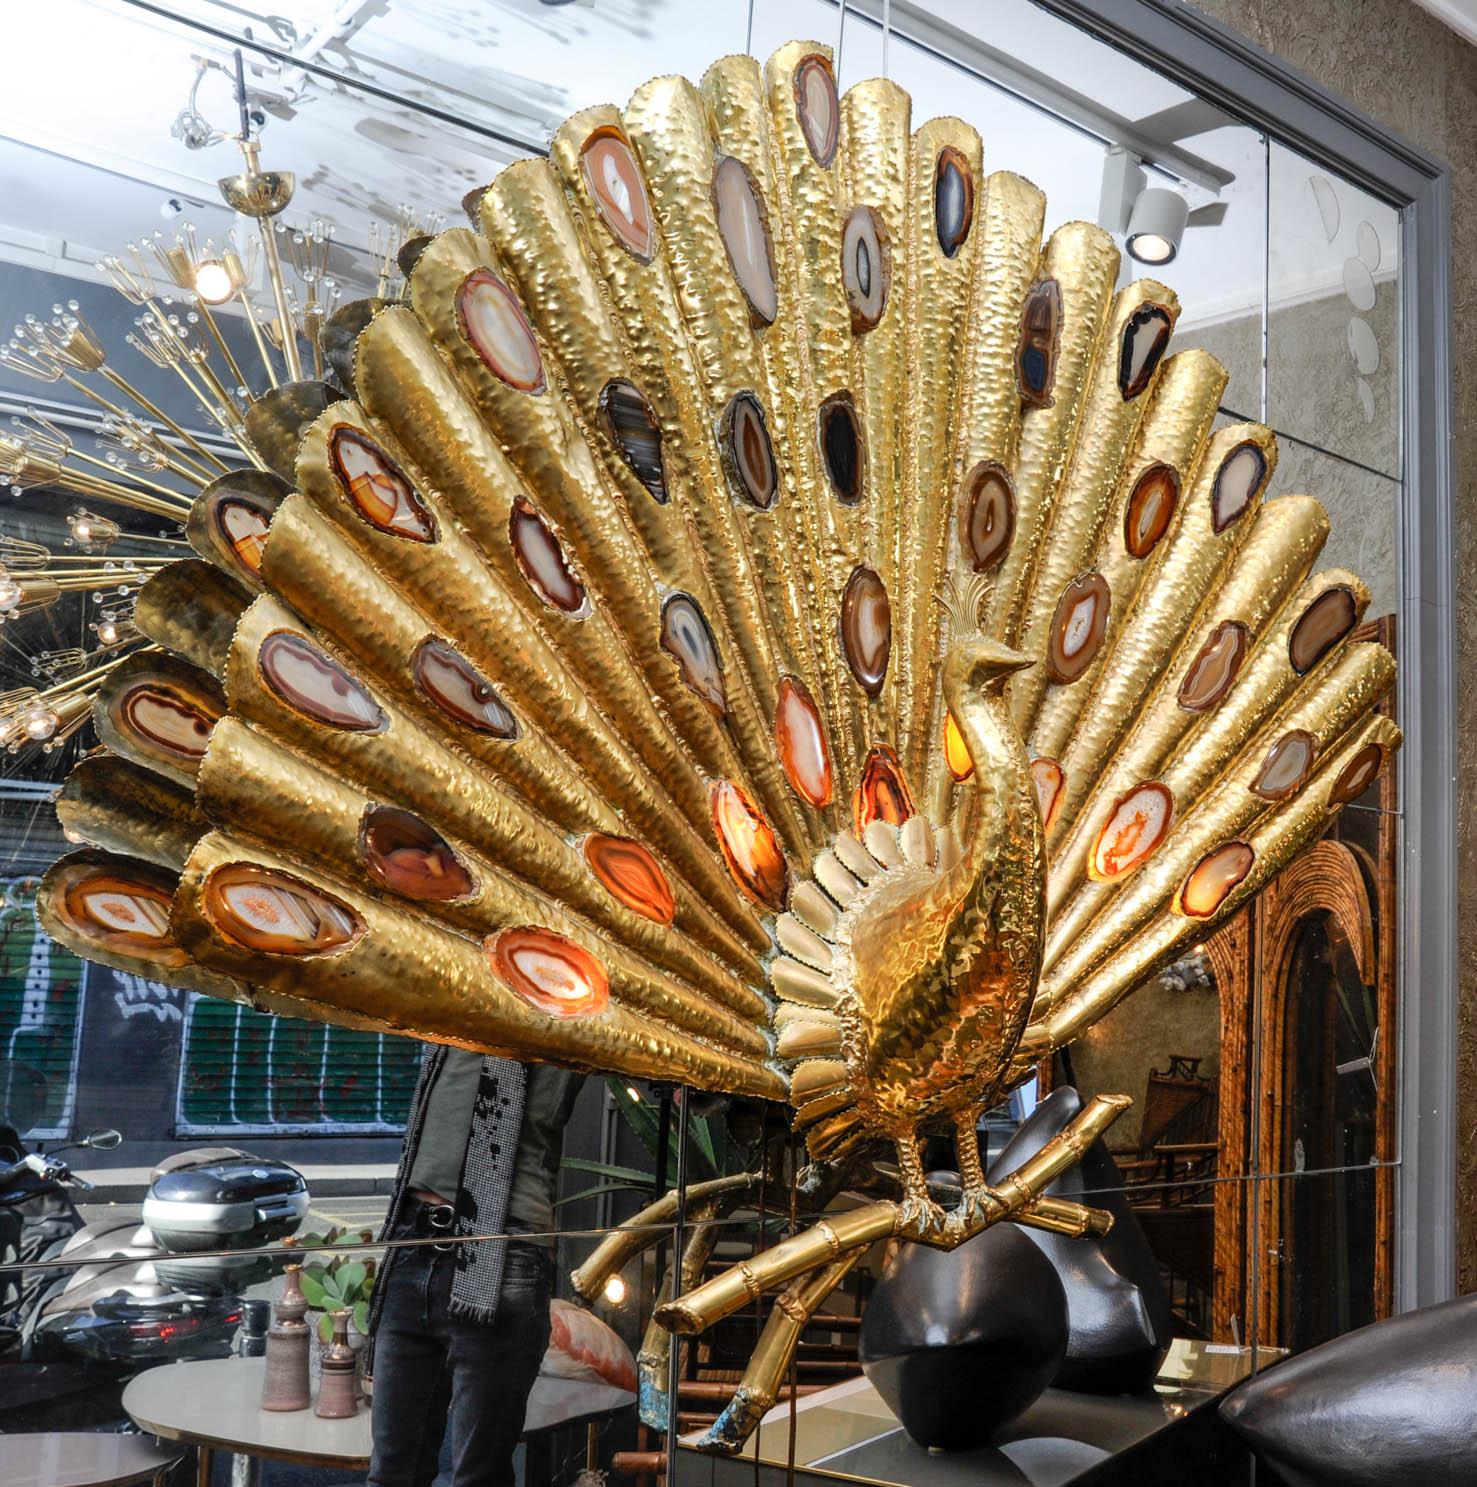 This monumental sconce is a sculptural brass peacock, incrusted with agate stone. Signed by Faure, it is wearing 9 light bulbs